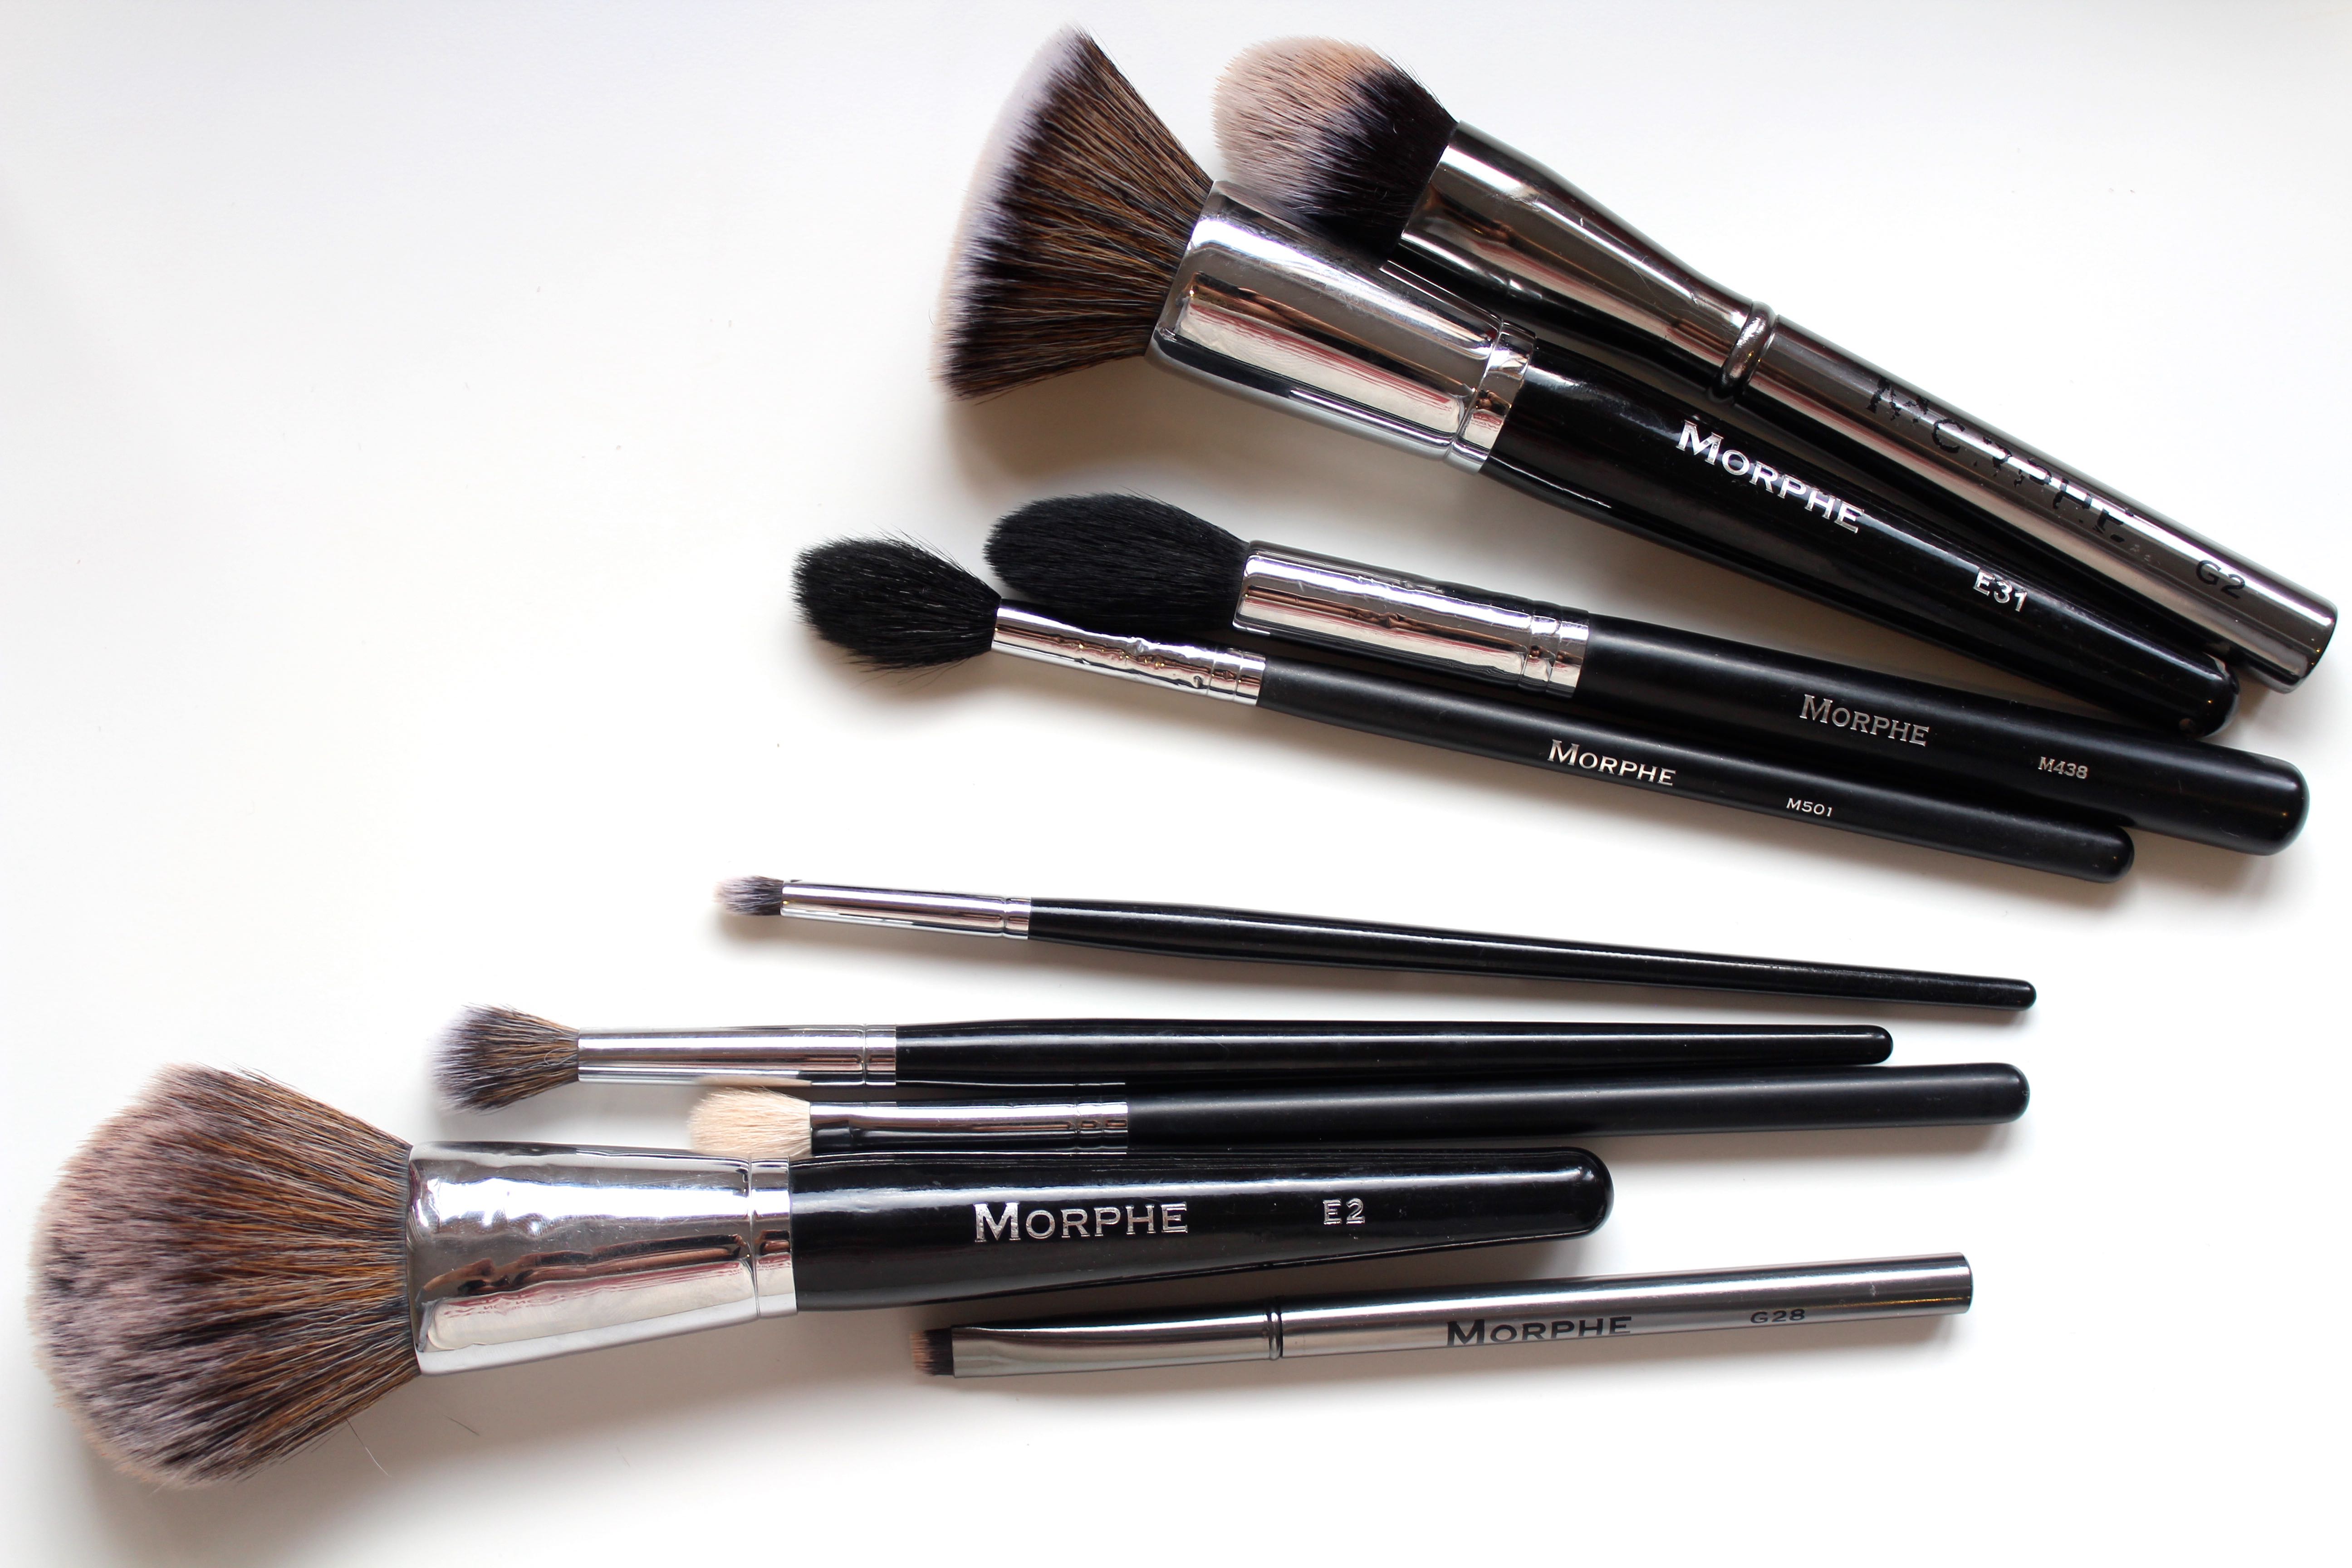 My Favourite Morphe Brushes by Facemadeup.com